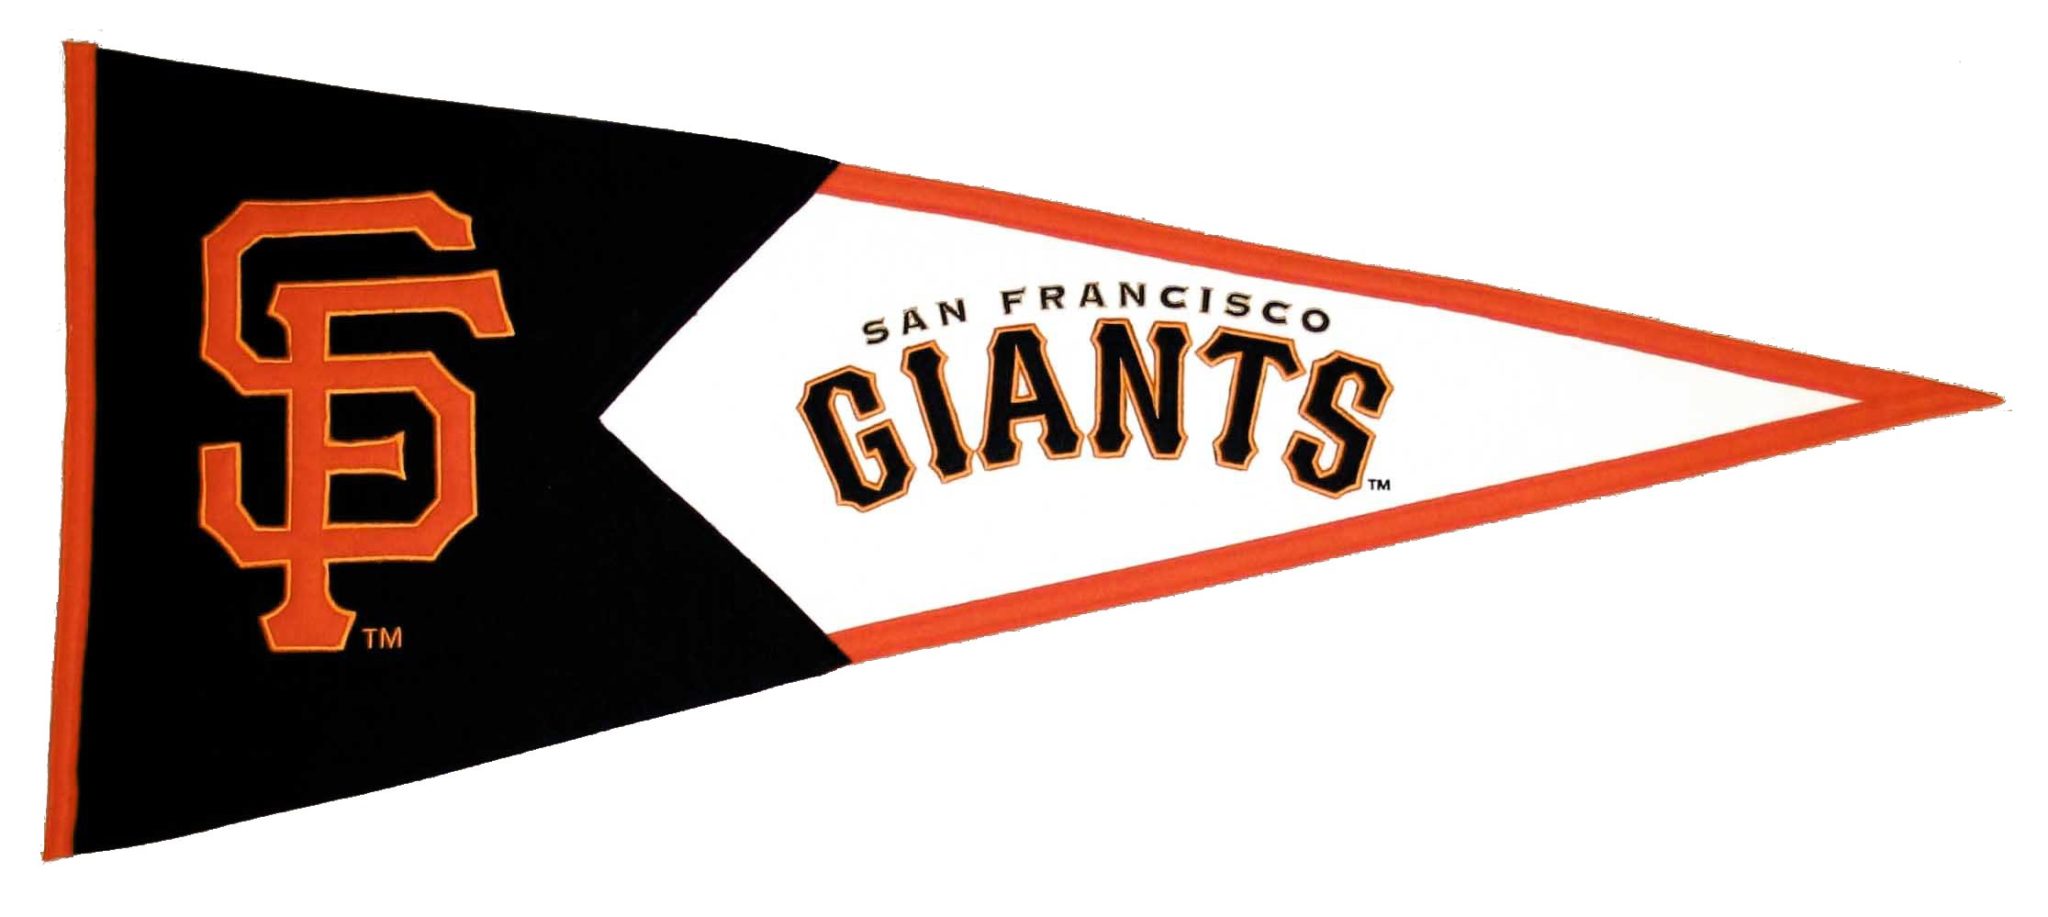 San Francisco Giants Clip Art drawing image in Vector cliparts category at pixy.org